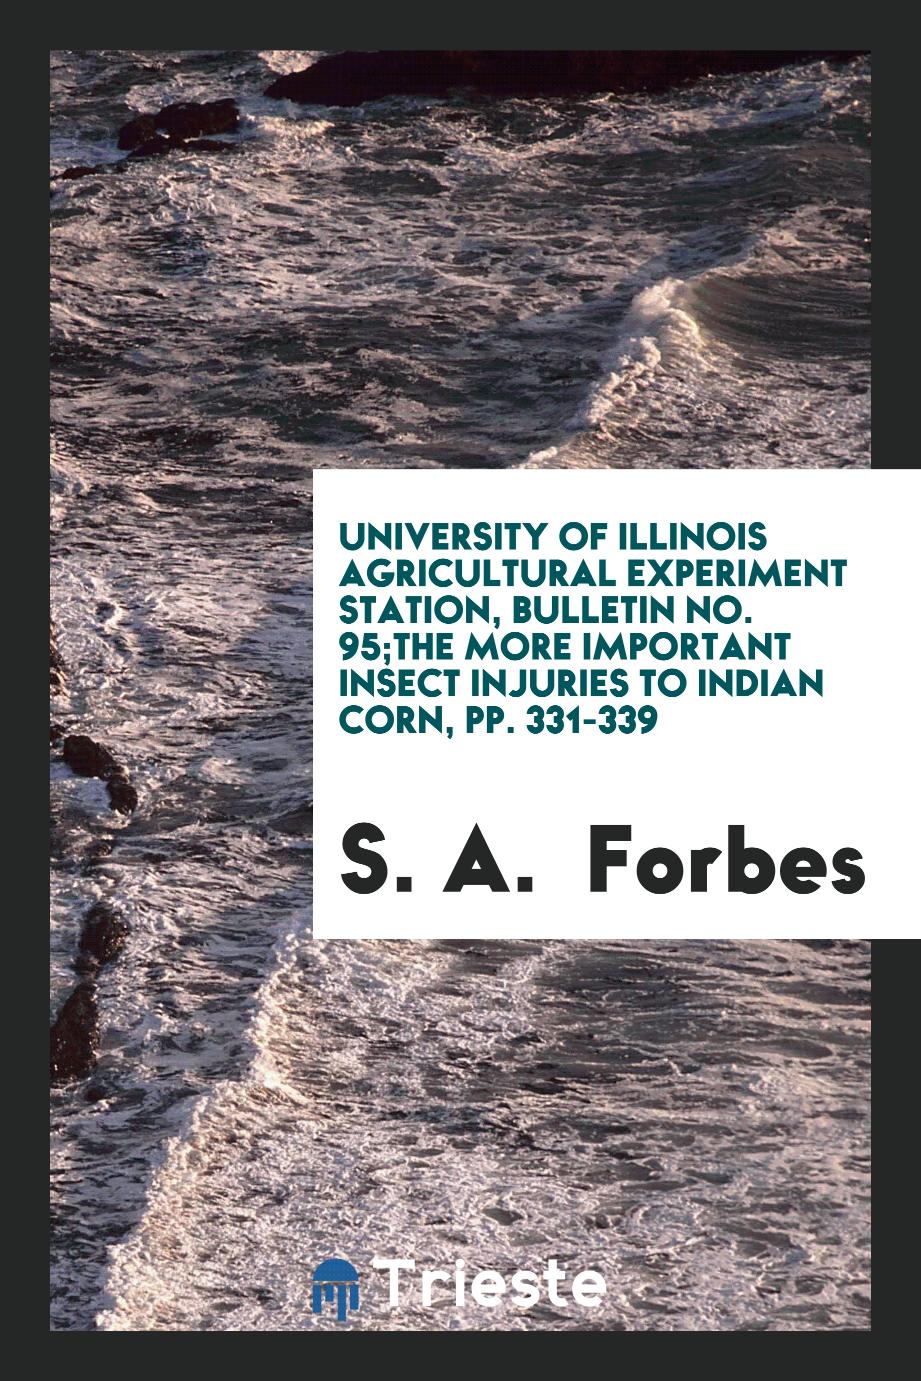 University of Illinois Agricultural Experiment Station, Bulletin No. 95;The more important insect injuries to Indian corn, pp. 331-339